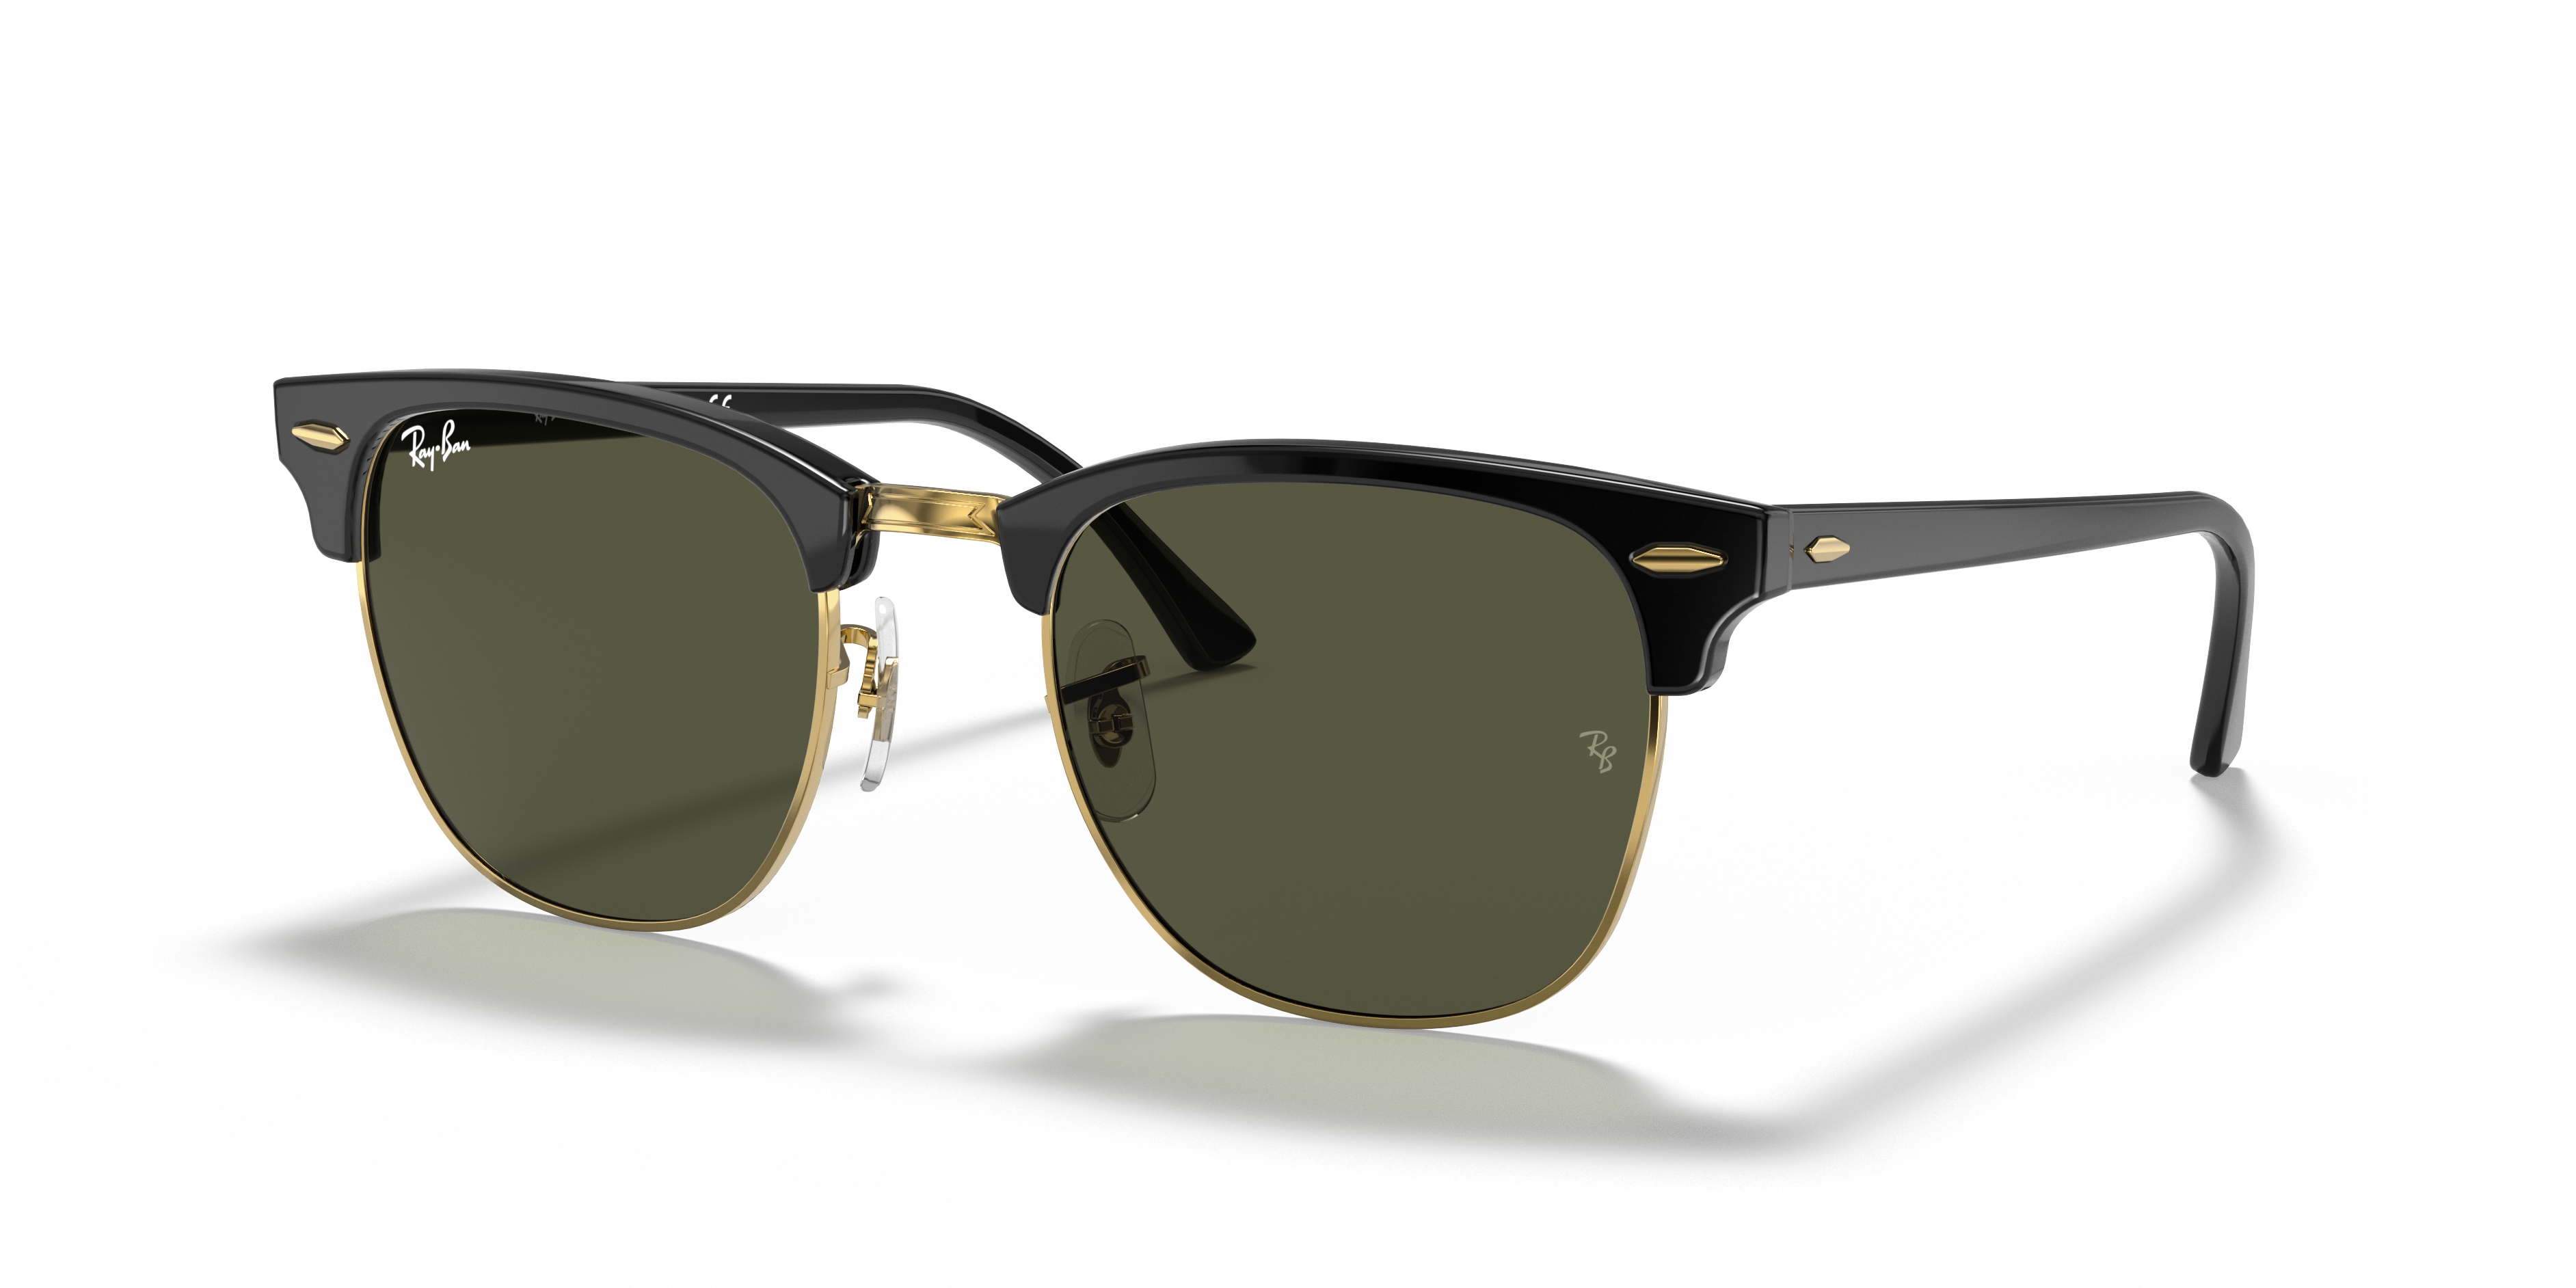 Ray Ban RB4175 Clubmaster Sunglasses Black Gold | Clubmaster sunglasses,  Sunglasses, Ray bans